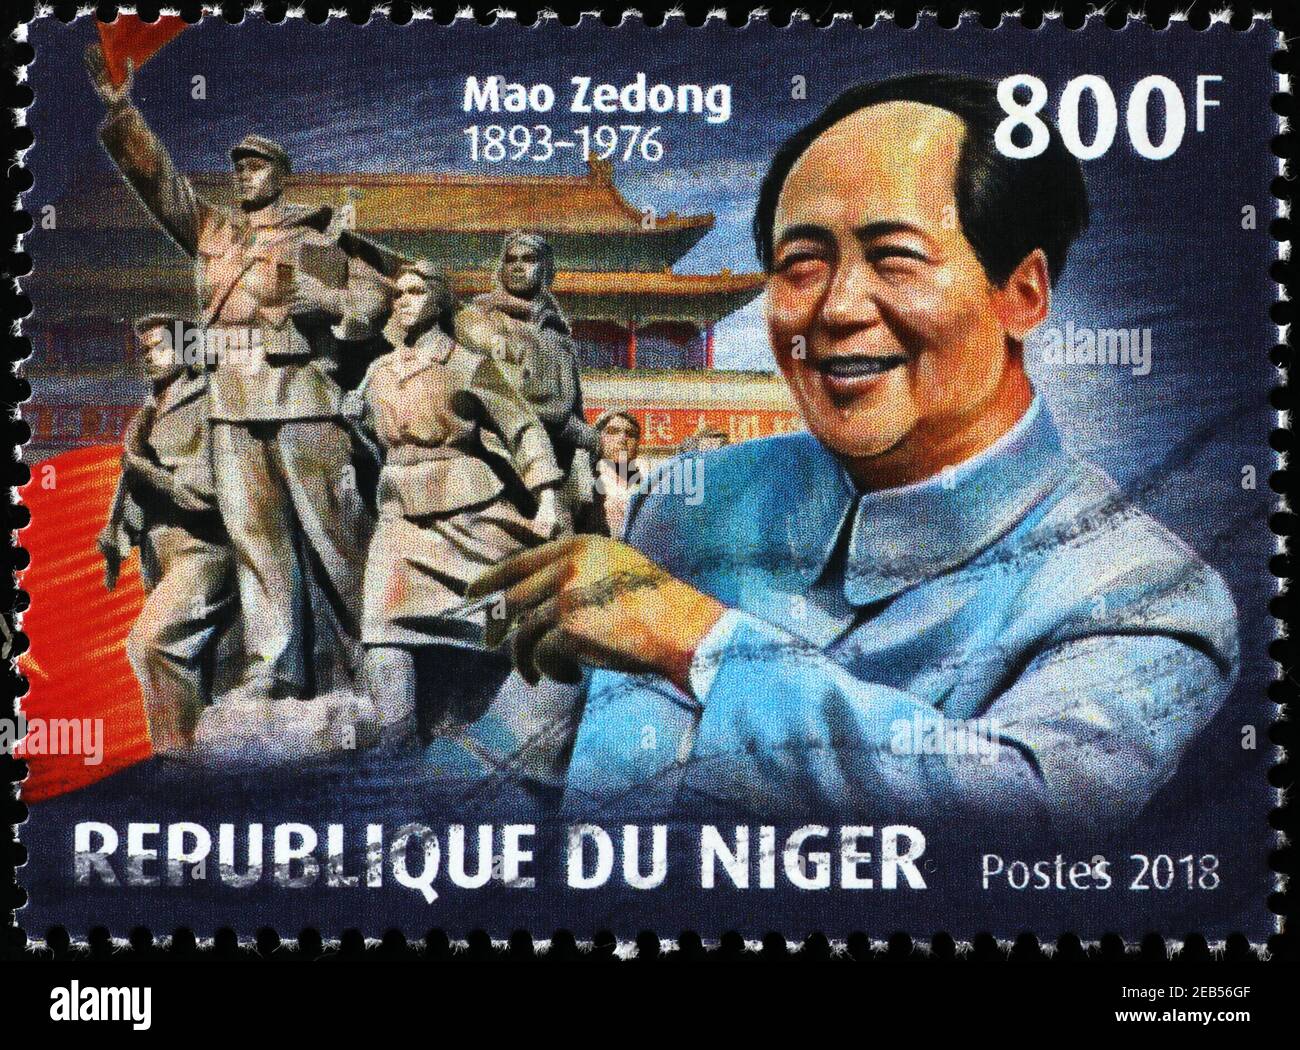 Mao Zedong portrait on african postage stamp Stock Photo